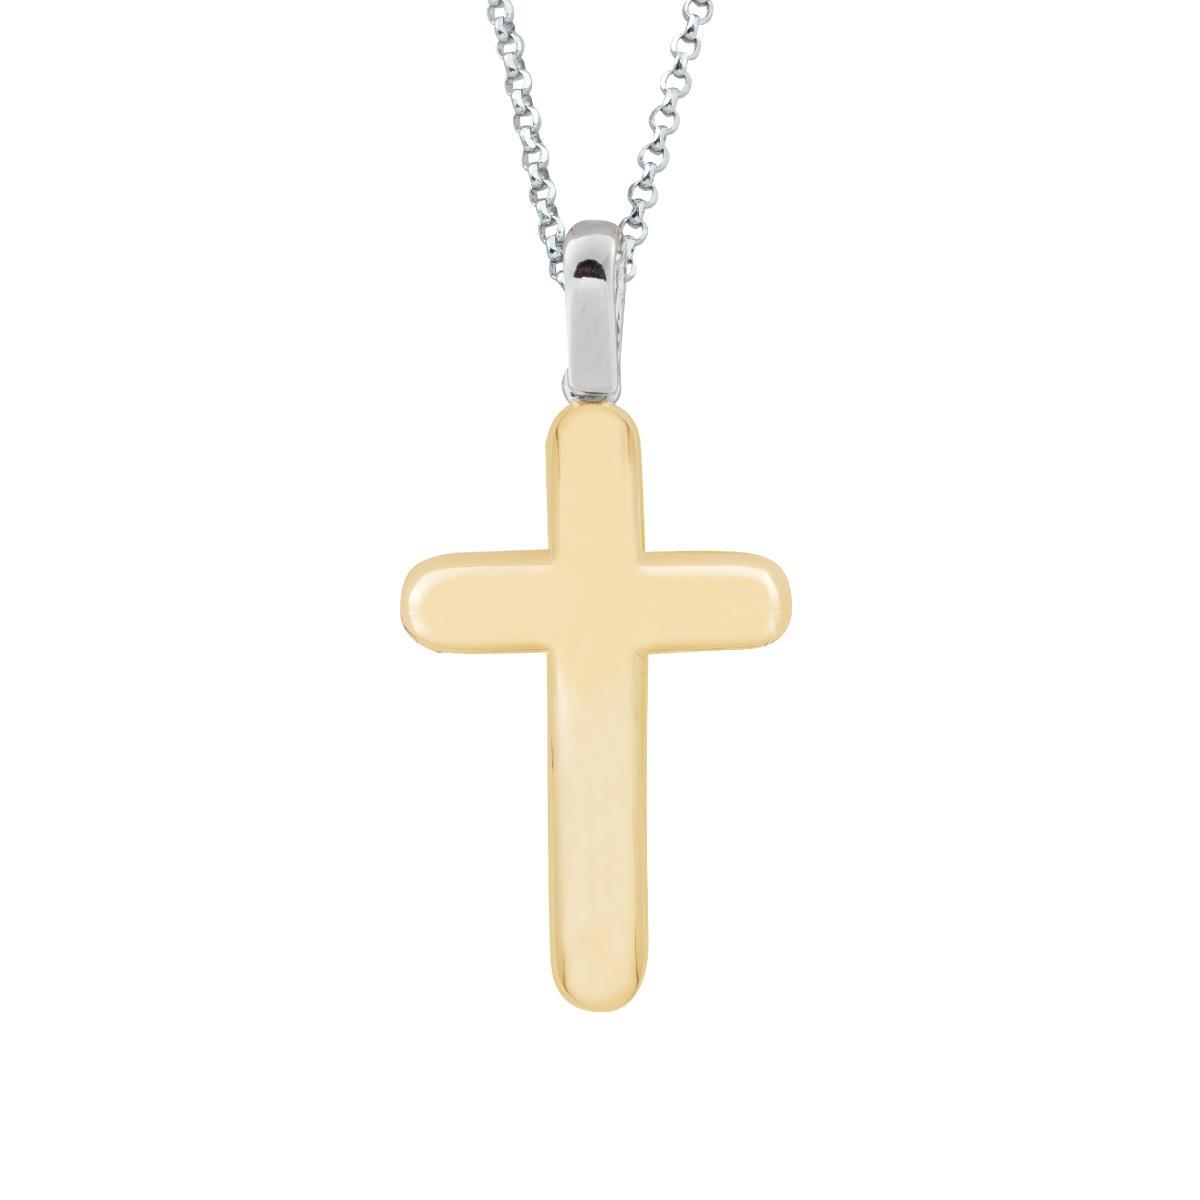 Cross necklace in 18 kt gold